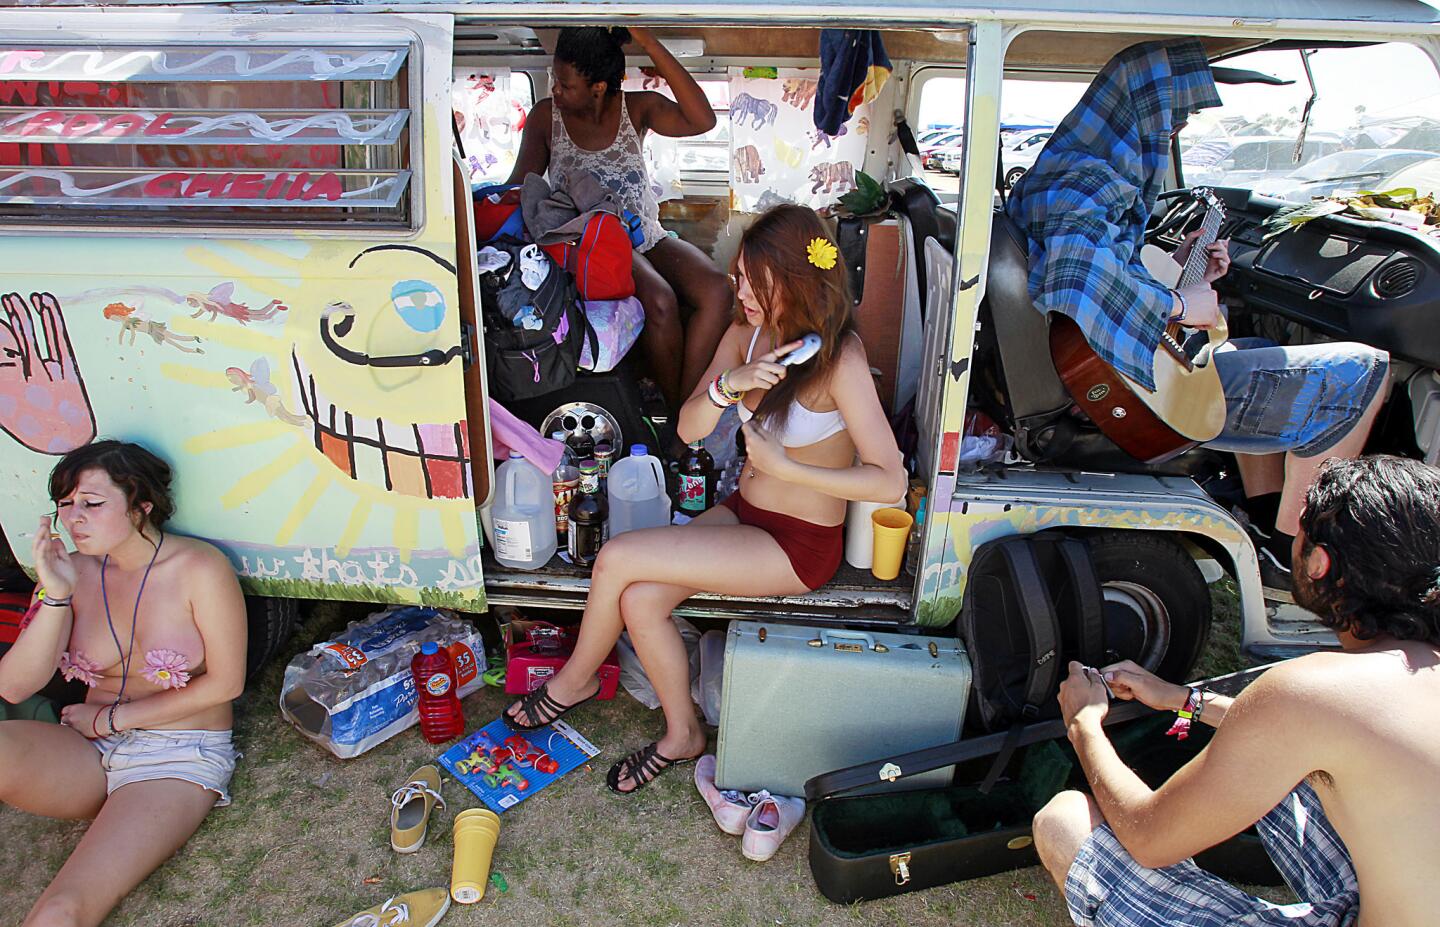 A group of festivalgoers chill out at an onsite campground Sunday, April 17, 2011, at the Coachella Music & Arts Festival in Indio.